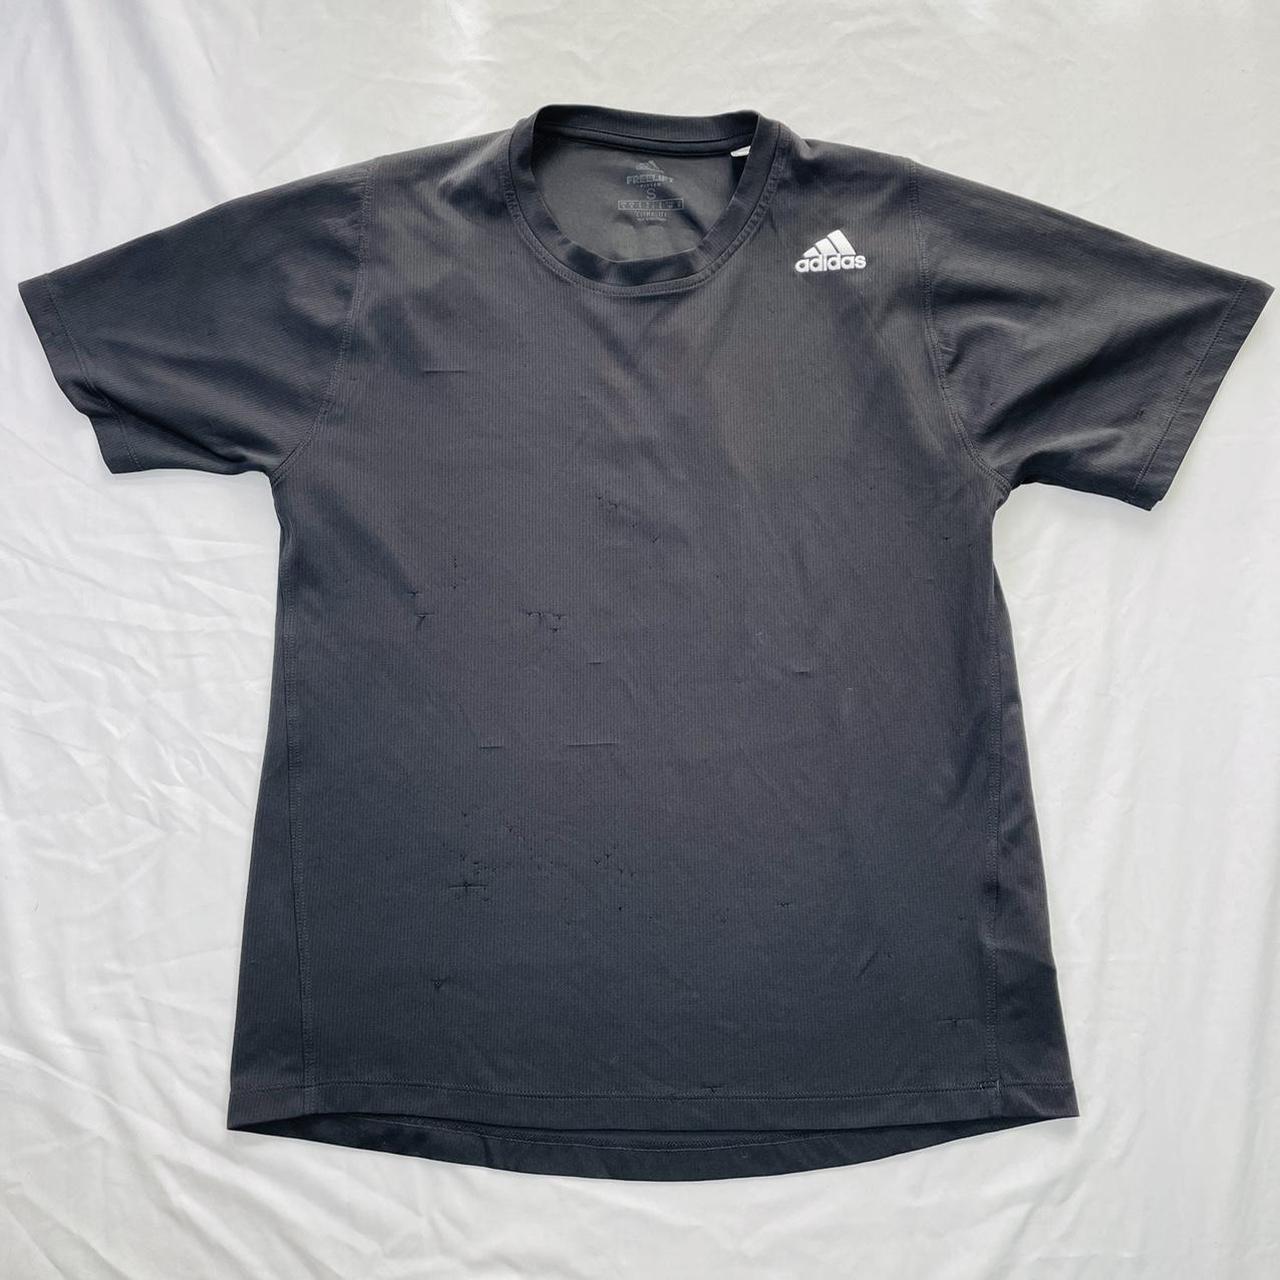 Product Image 1 - adidas shirt 

has some pulled